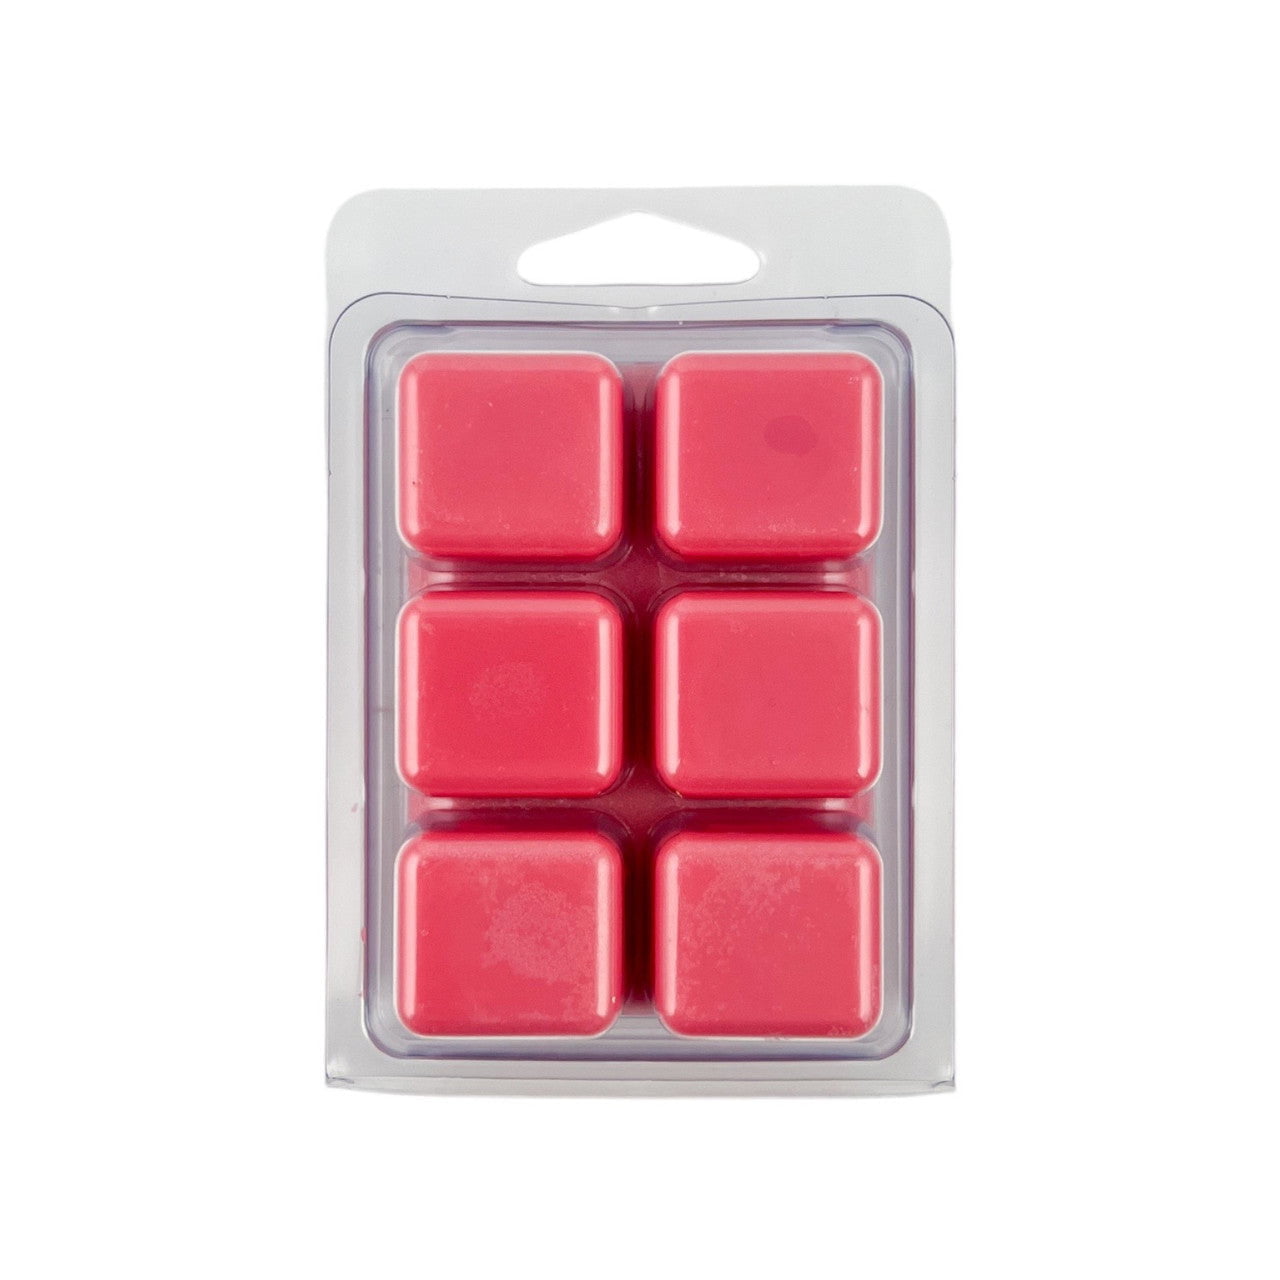 Watermelon -Wax Melts - Old Town Soap Co.